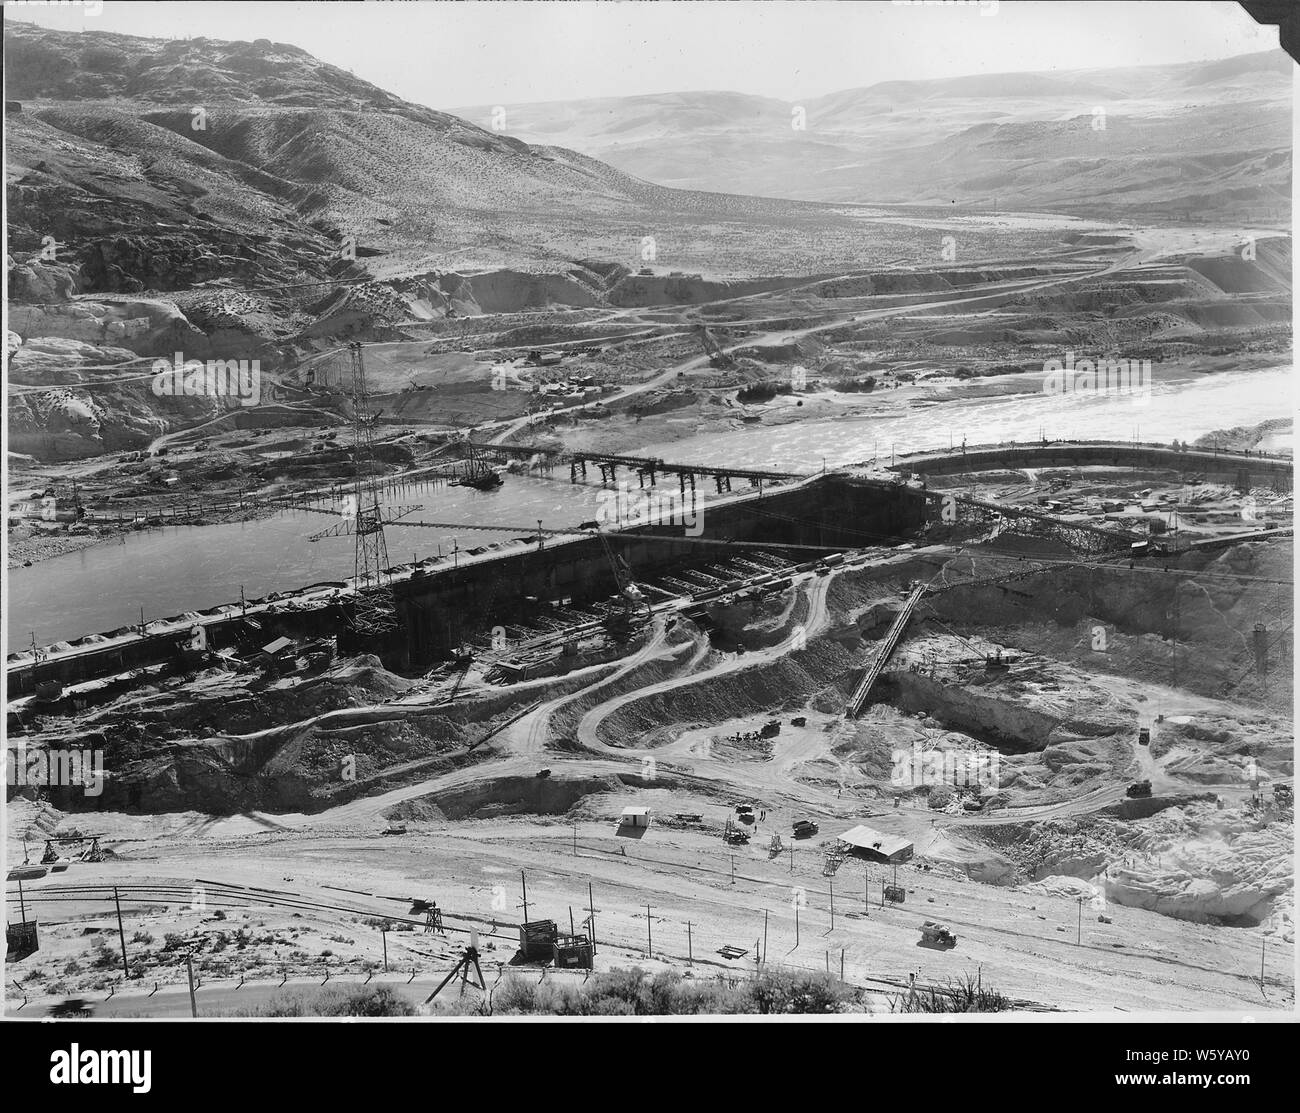 The southeast corner of the immense 3,000 foot Grand Coulee cofferdam; Scope and content:  Photograph from Volume Two of a series of photo albums documenting the construction of the Grand Coulee Dam and related work on the Columbia Basin Project.  Full caption for this photograph reads: The southeast corner of the immense 3,000 foot Grand Coulee cofferdam; between the cell clusters will be seen the timber struts in the section now being excavated for placing the first concrete in the Grand Coulee Dam; overhead is a portion of the 3,500 foot suspension bridge for transporting sand and gravel fr Stock Photo